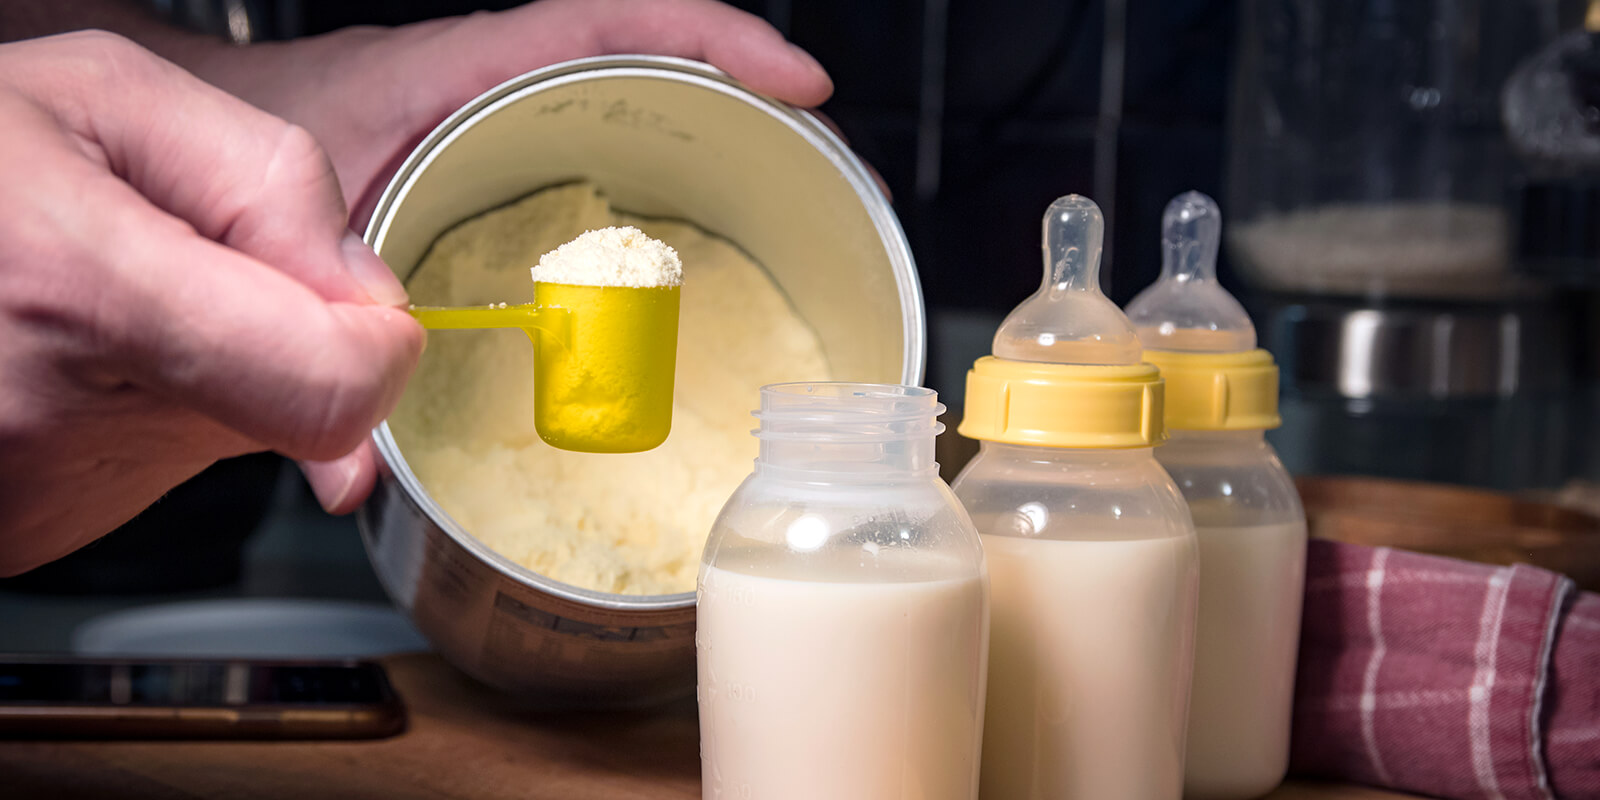 Congress must act now to address nationwide infant formula shortage